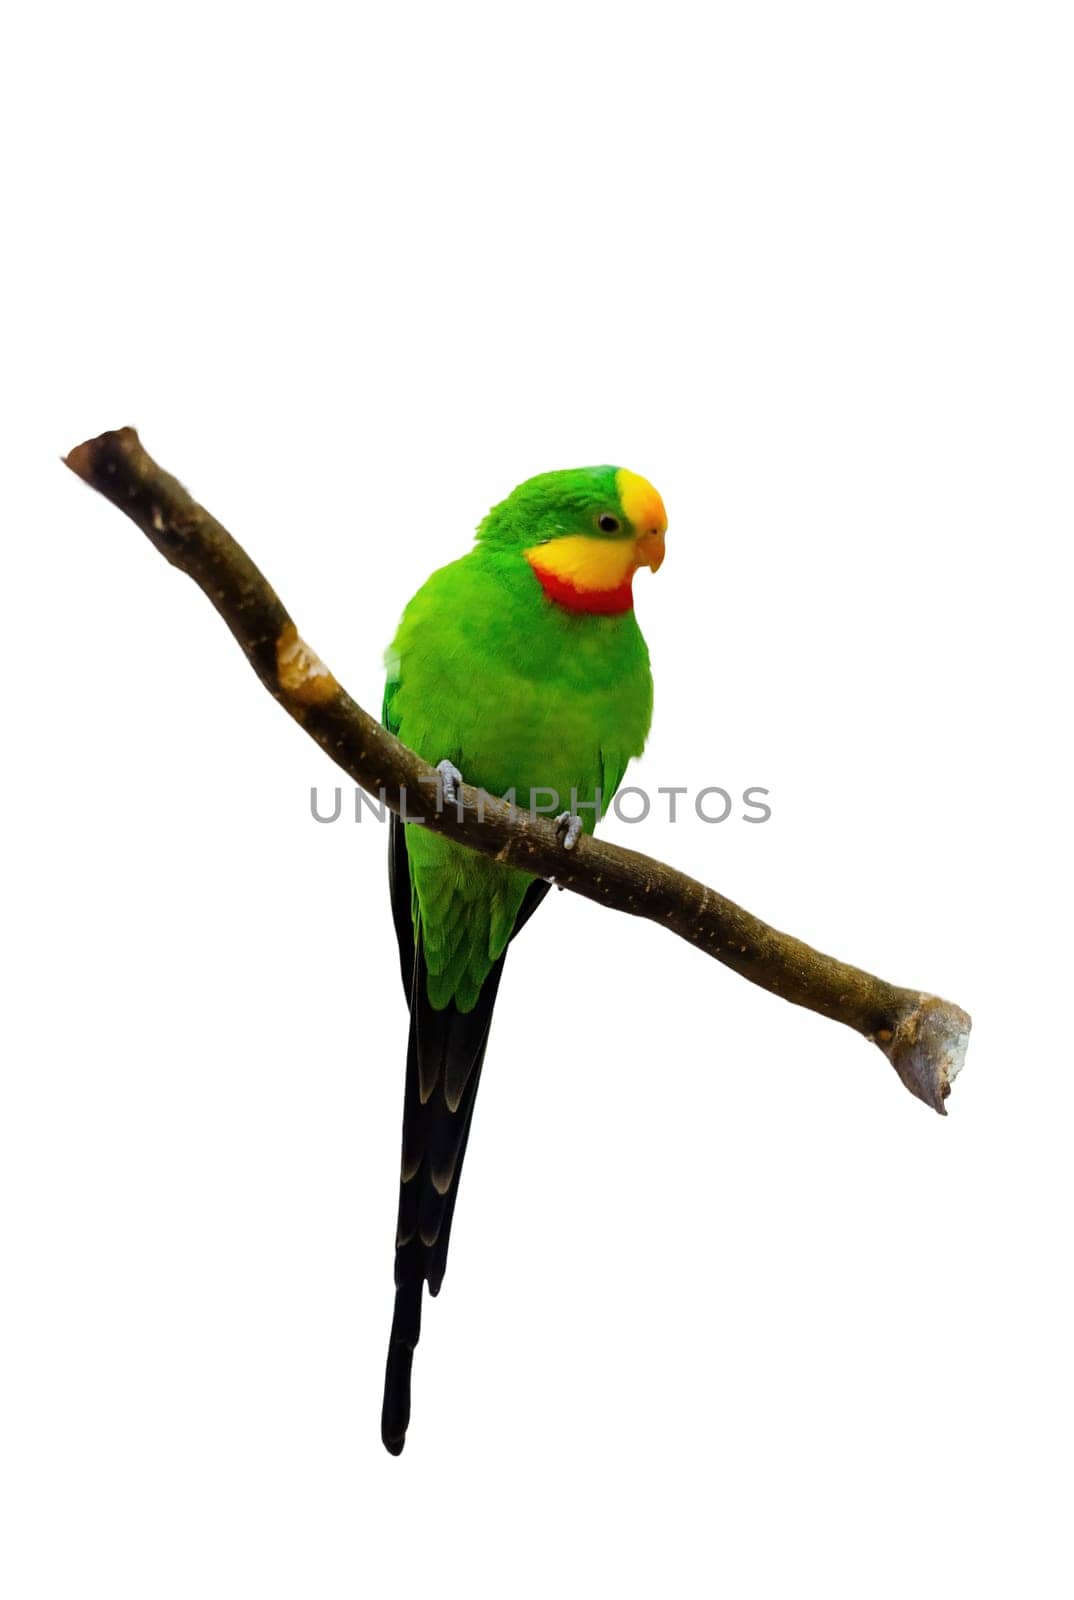 Superb parrot polytelis swainsonii beautiful bird on wooden branch, bright green colors feathers.